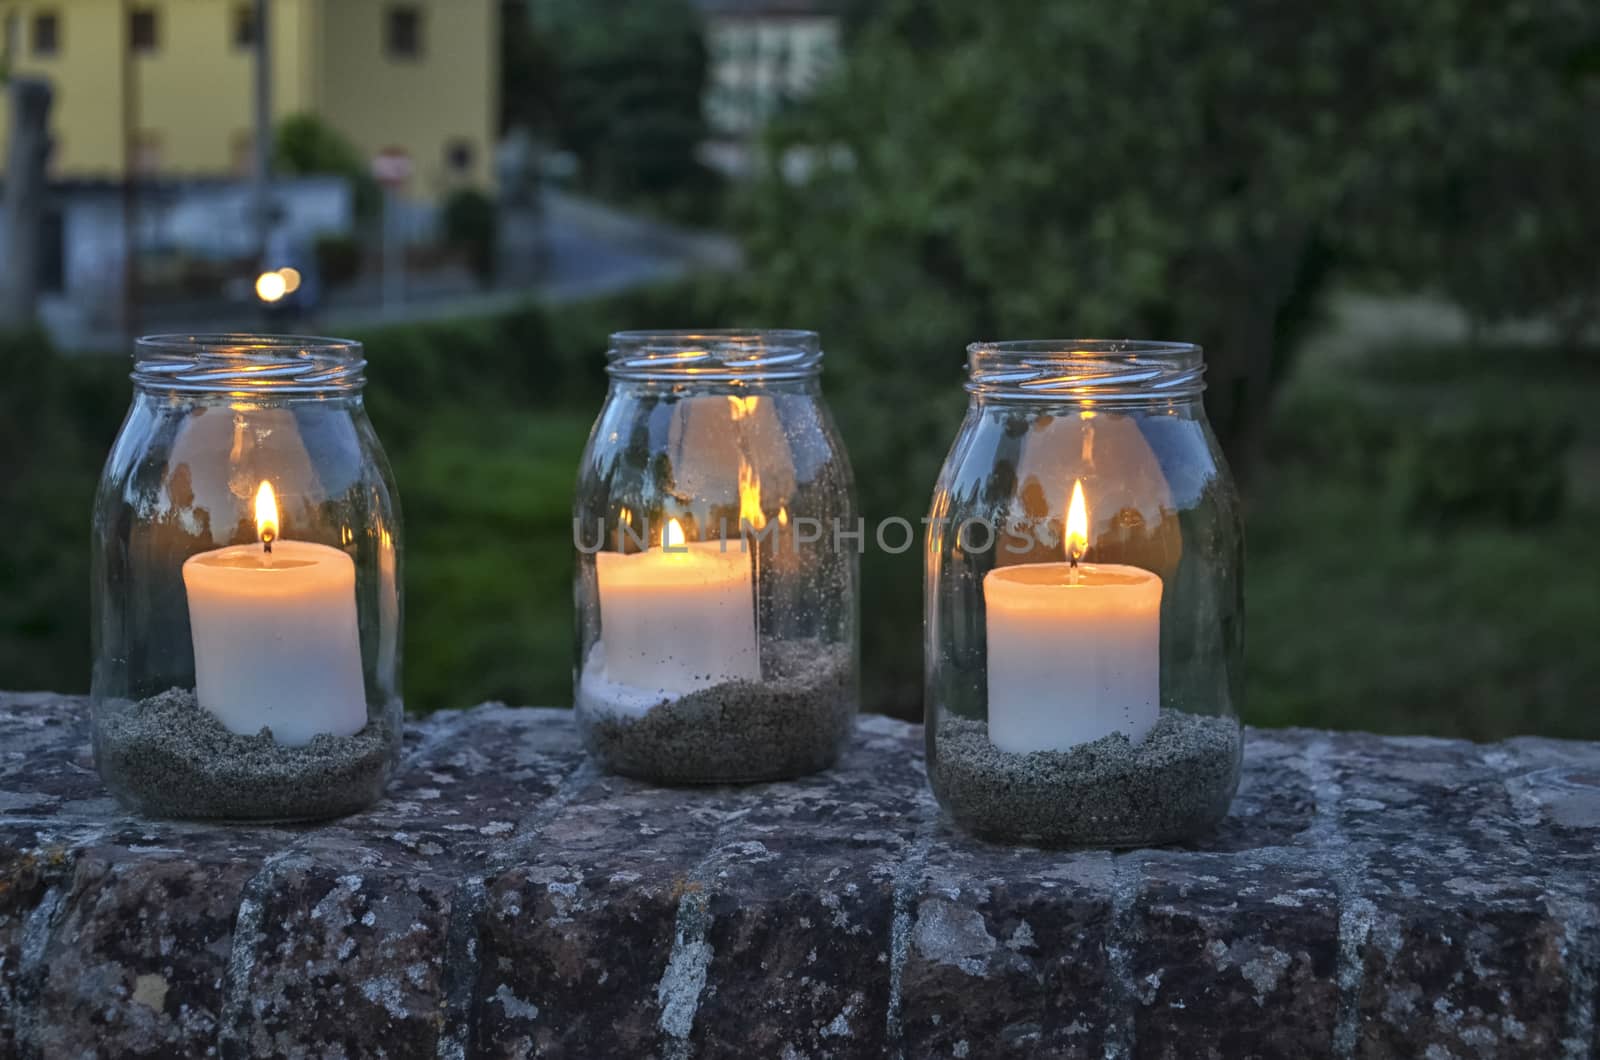 View of glass jars with lit candles inside